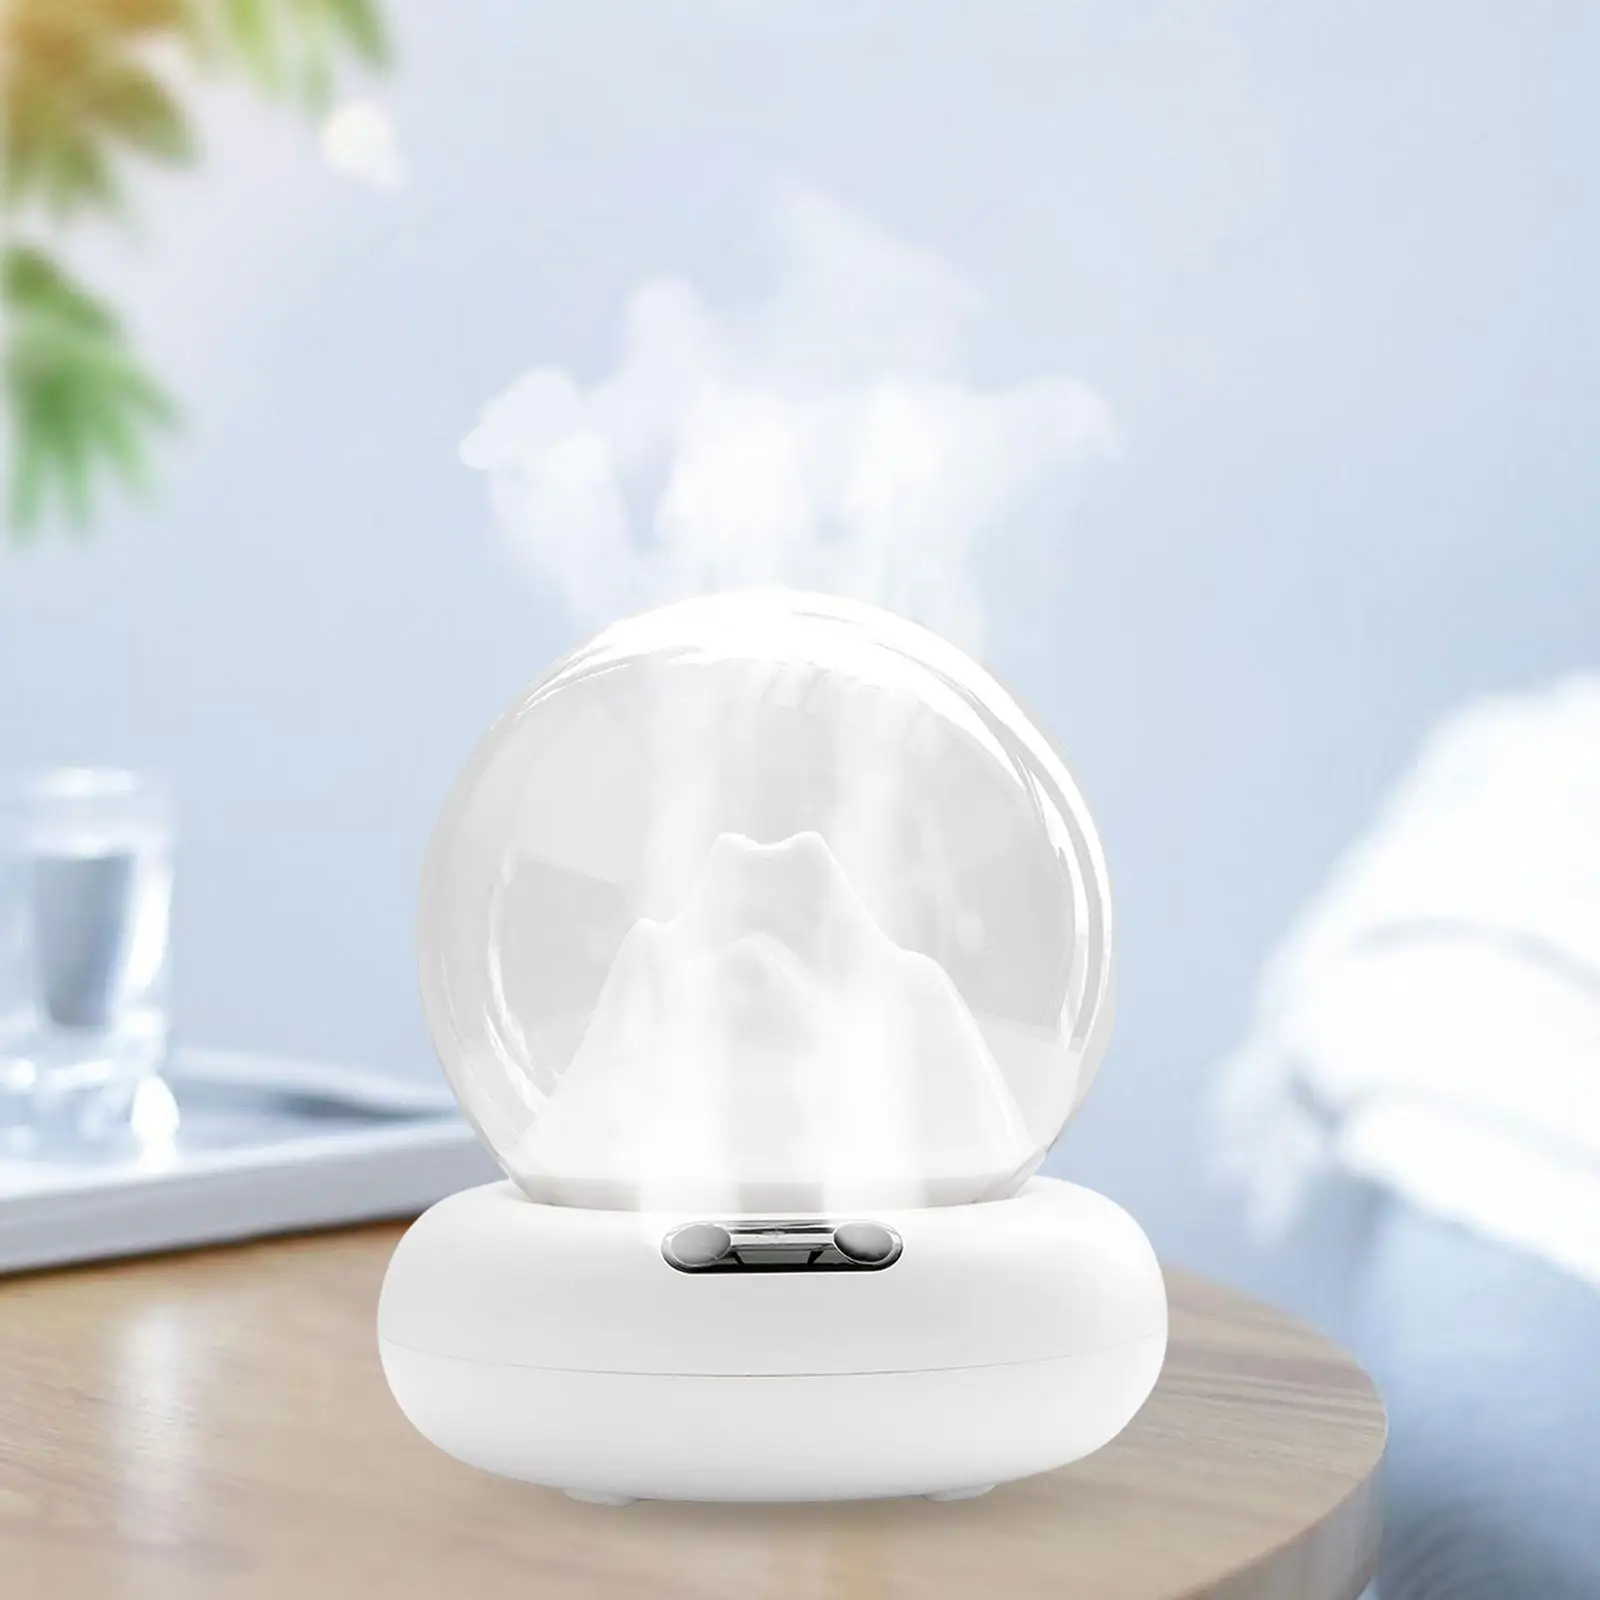 Electric Double Spray Humidifier 2L USB Silent maker Home decor